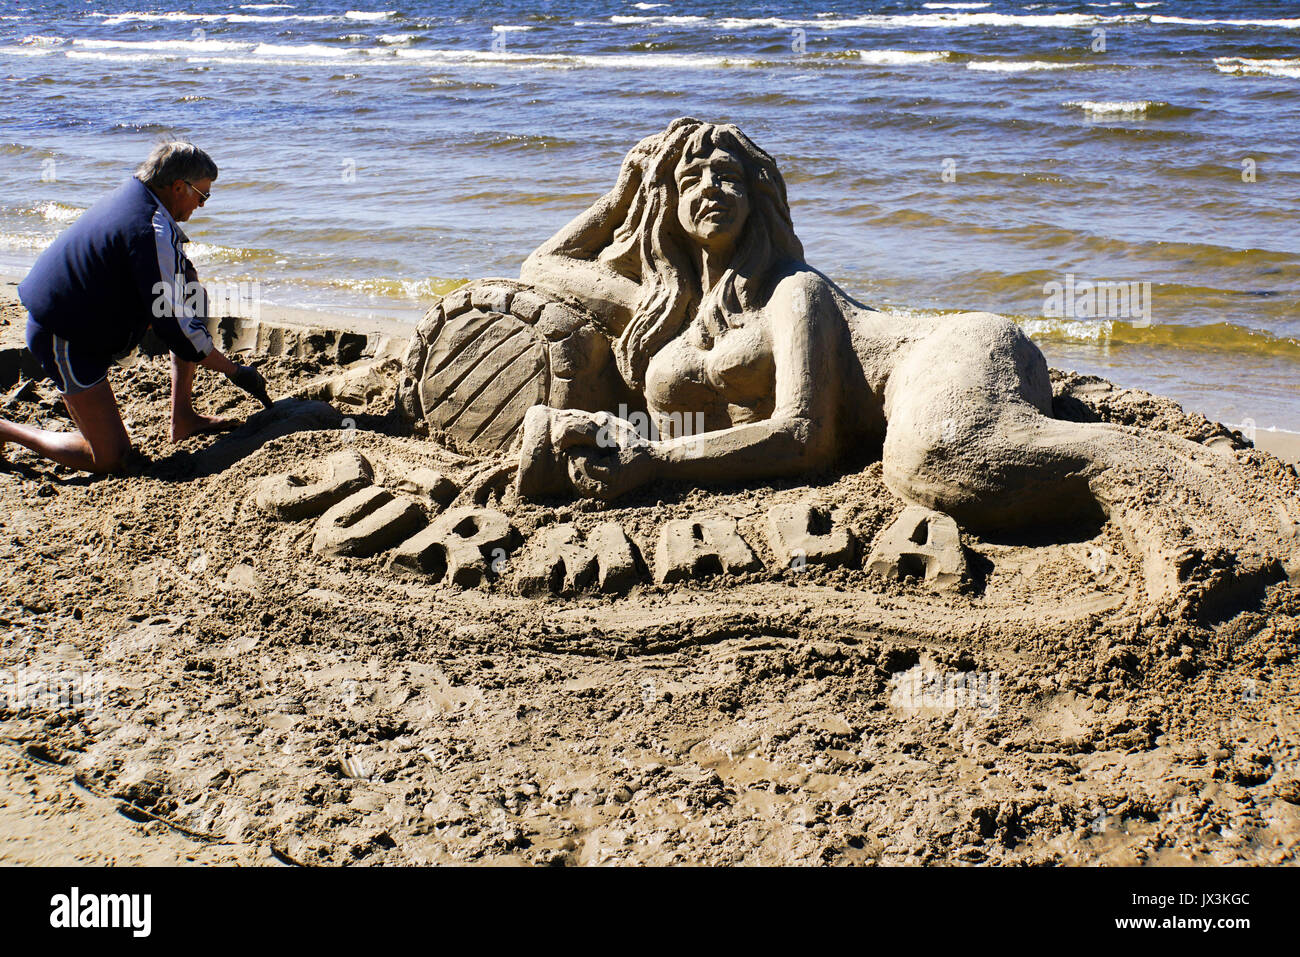 Artist makes a sand sculpture of a Mermaid. Photographed in Jurmala, Latvia Stock Photo